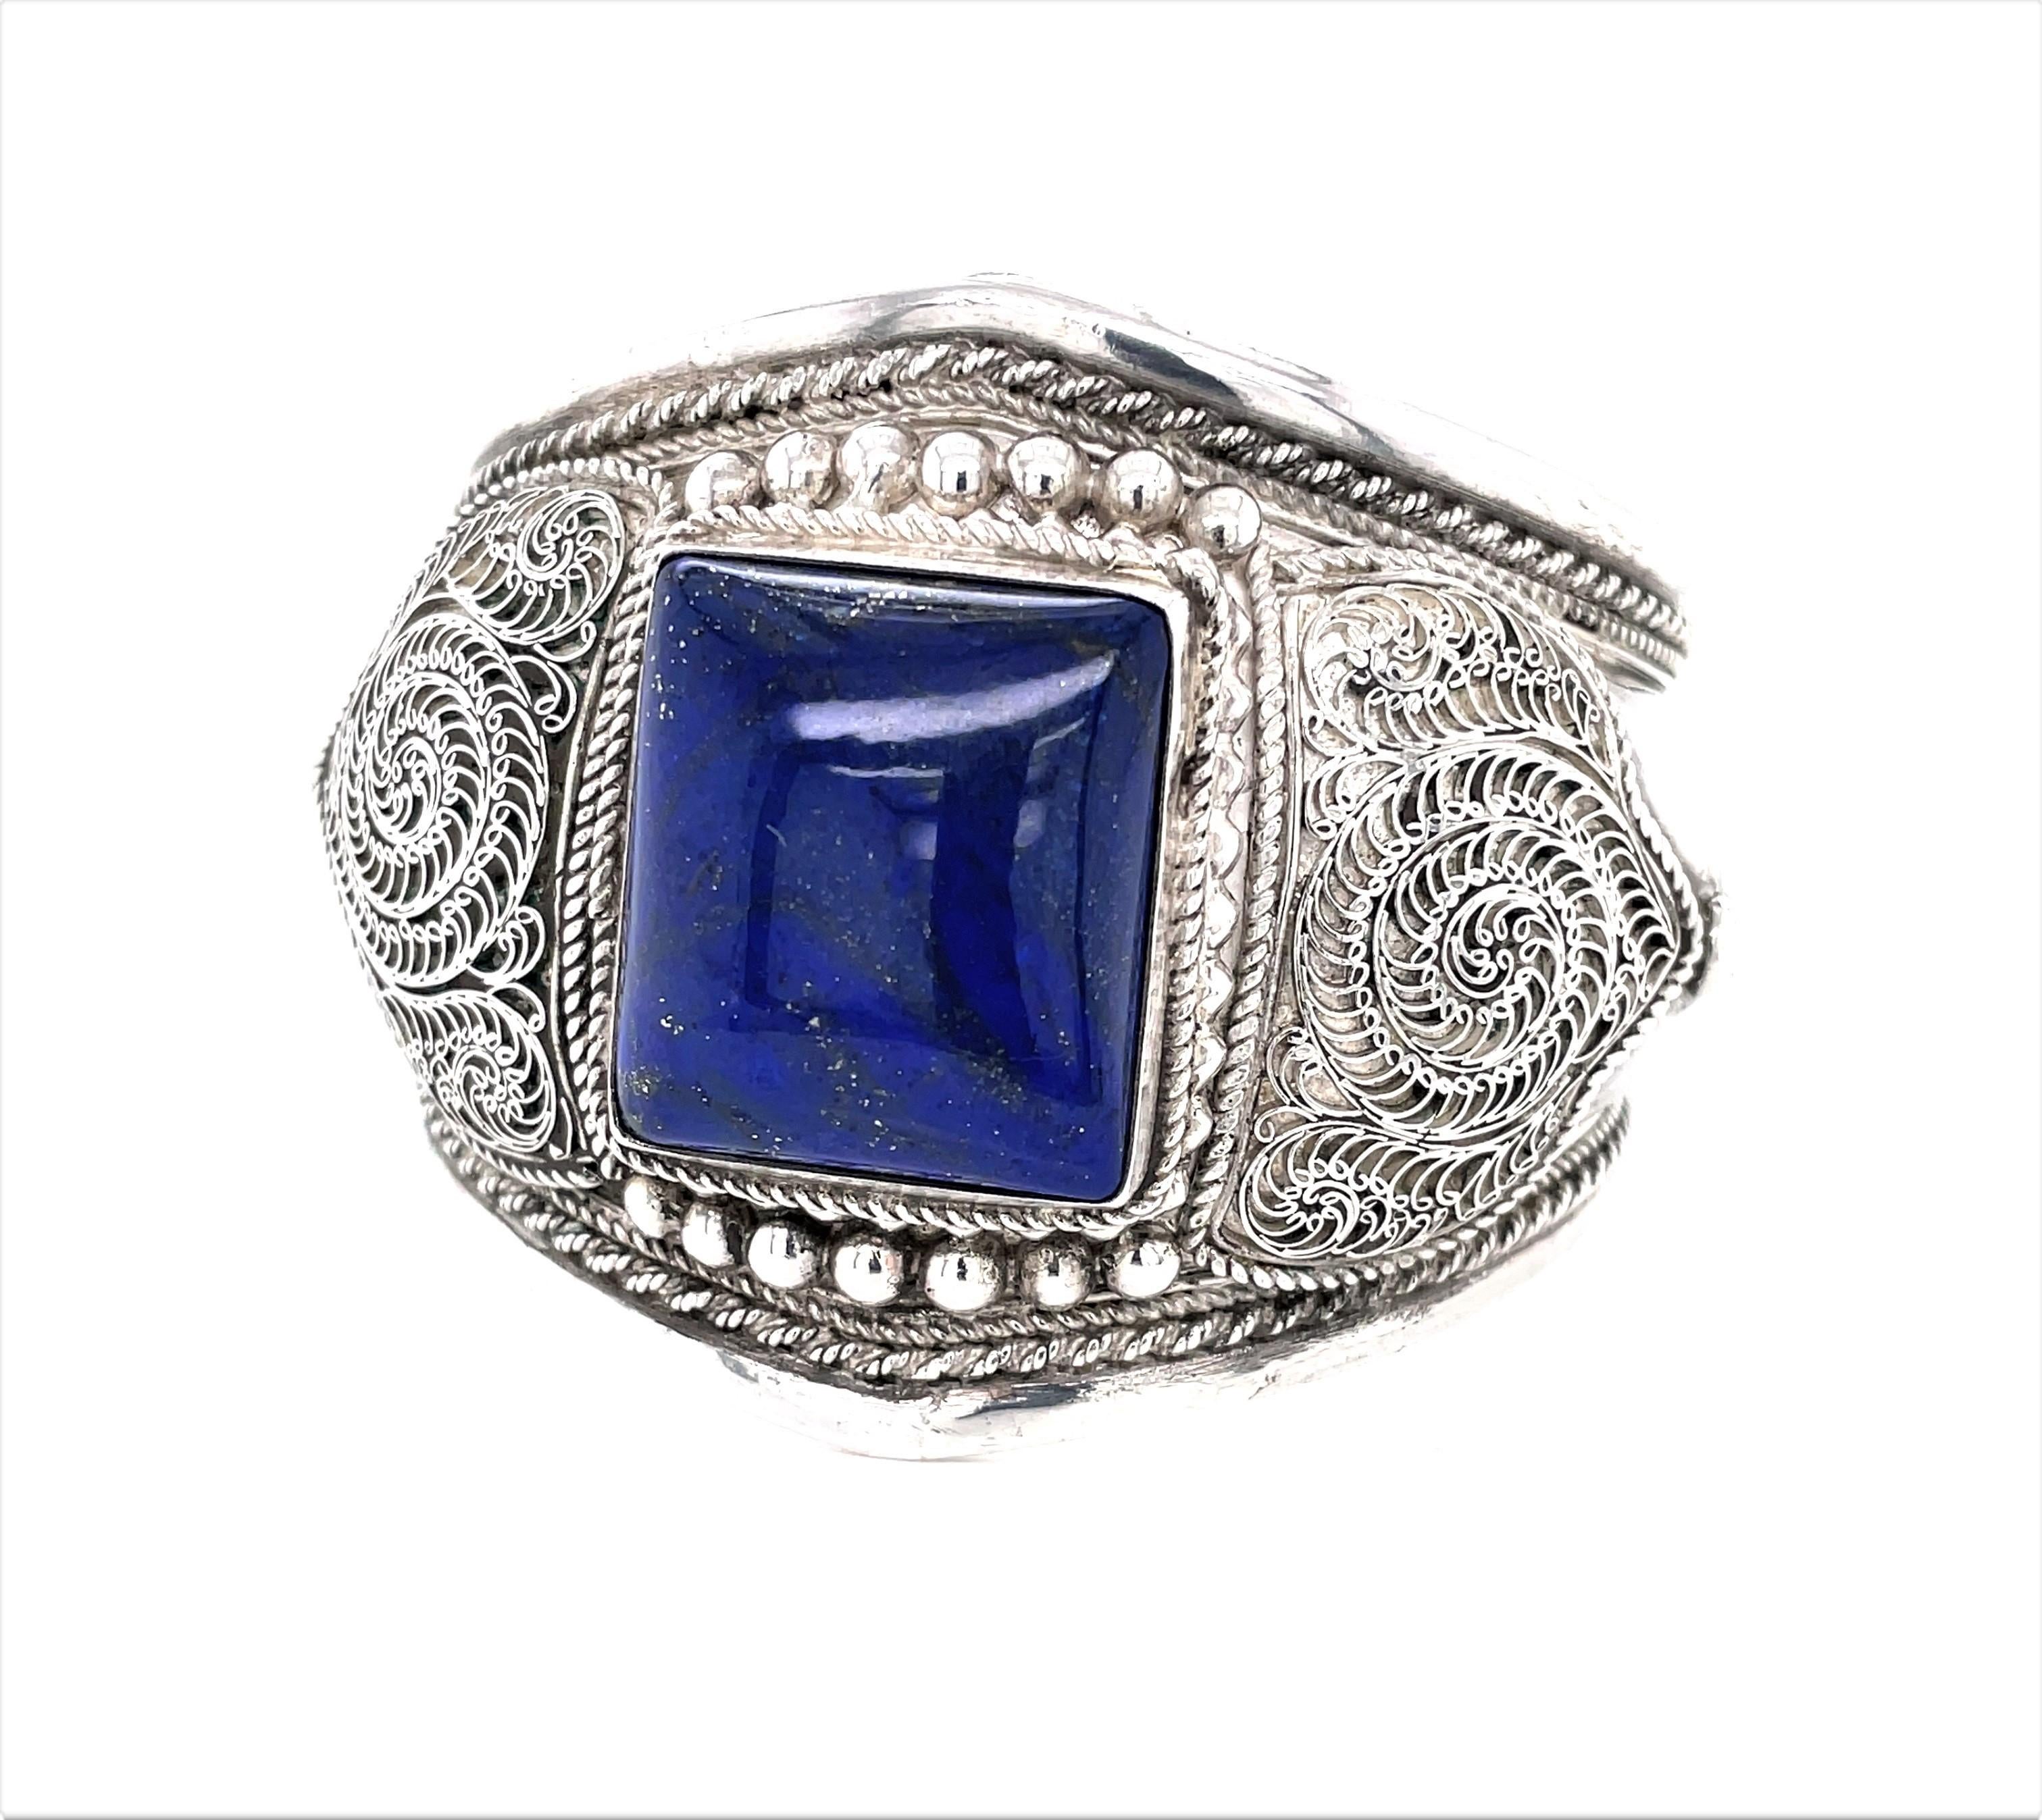 Appreciate the impressive silversmith craftsmanship presented in the ornate silver wire work that surrounds a striking vivid blue 20 x 23 mm lapis stone center that is featured on this artisan cuff hand made of made of .900 silver. The center point